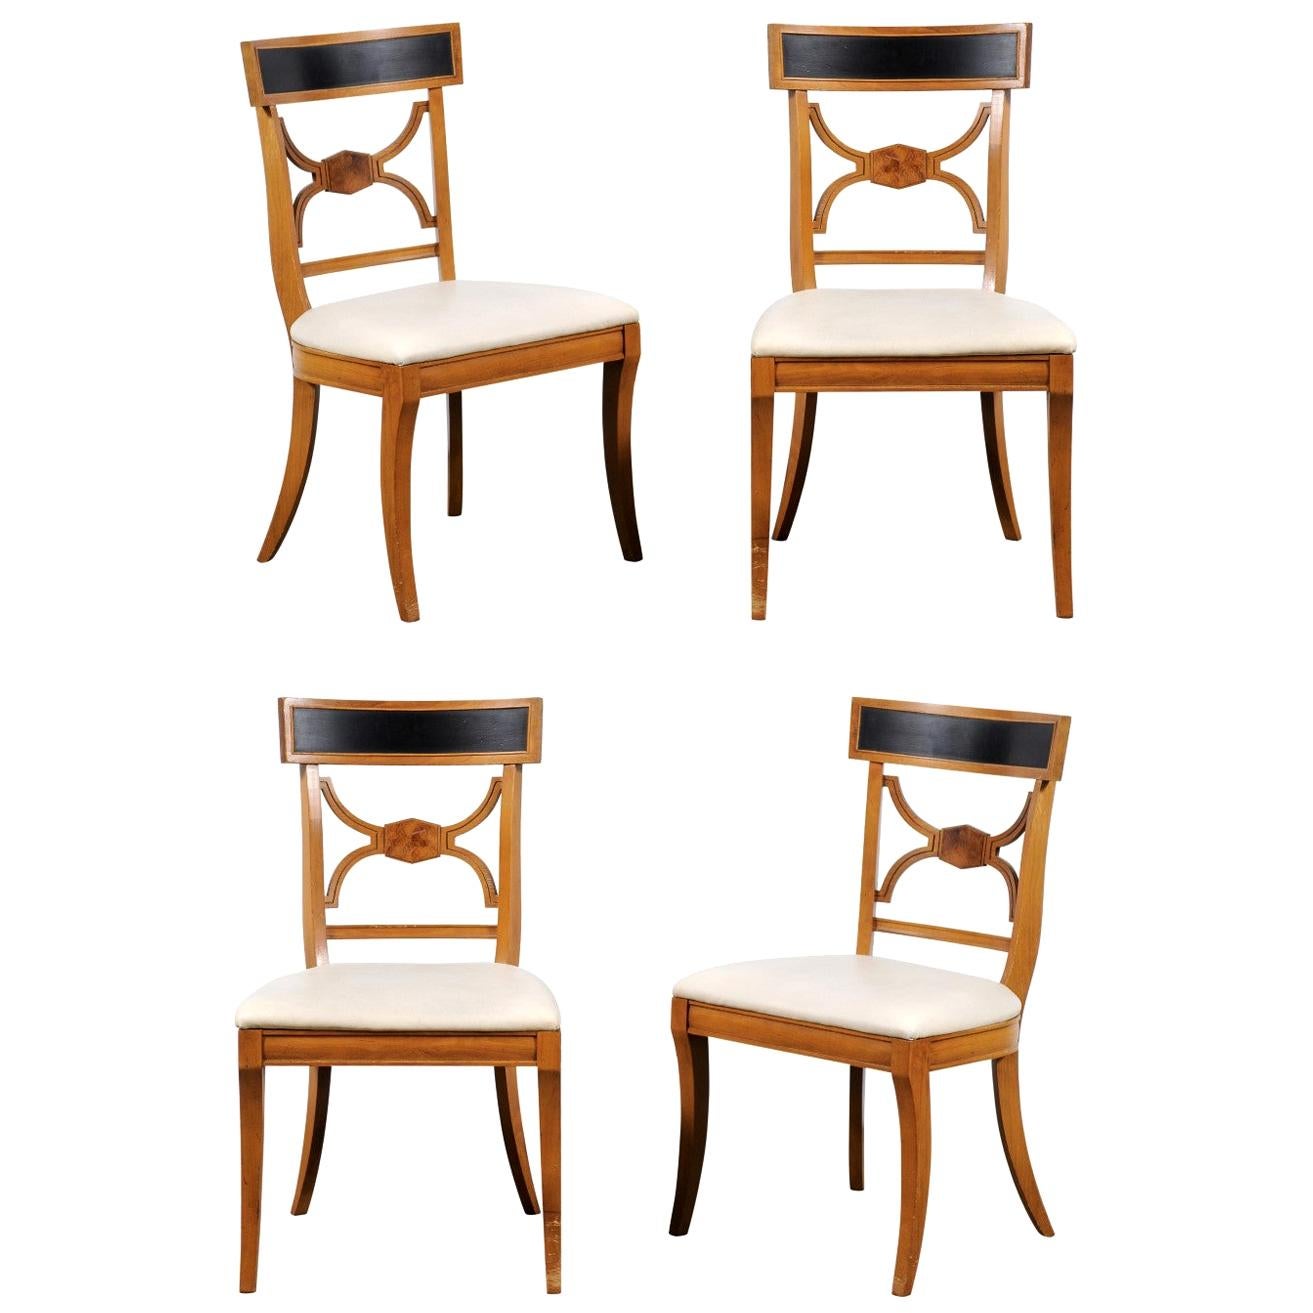 Regency Revival Klismos-Style Black Painted Chairs, Four or a Set For Sale